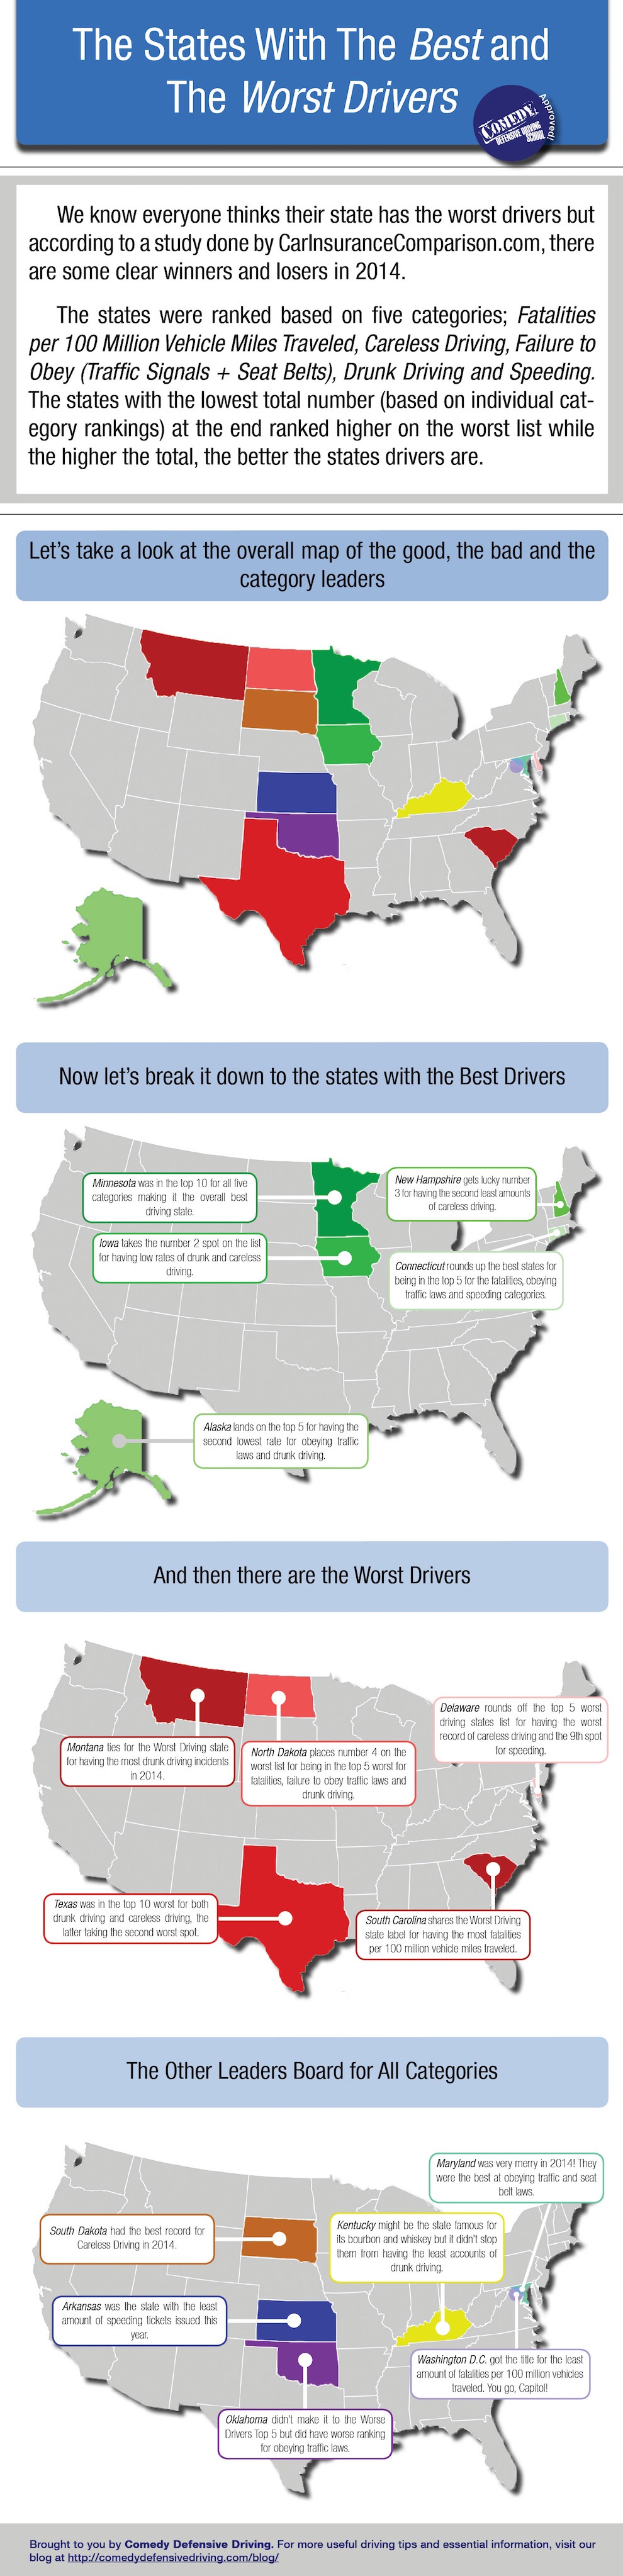 Best and Worst Driving States Infographic